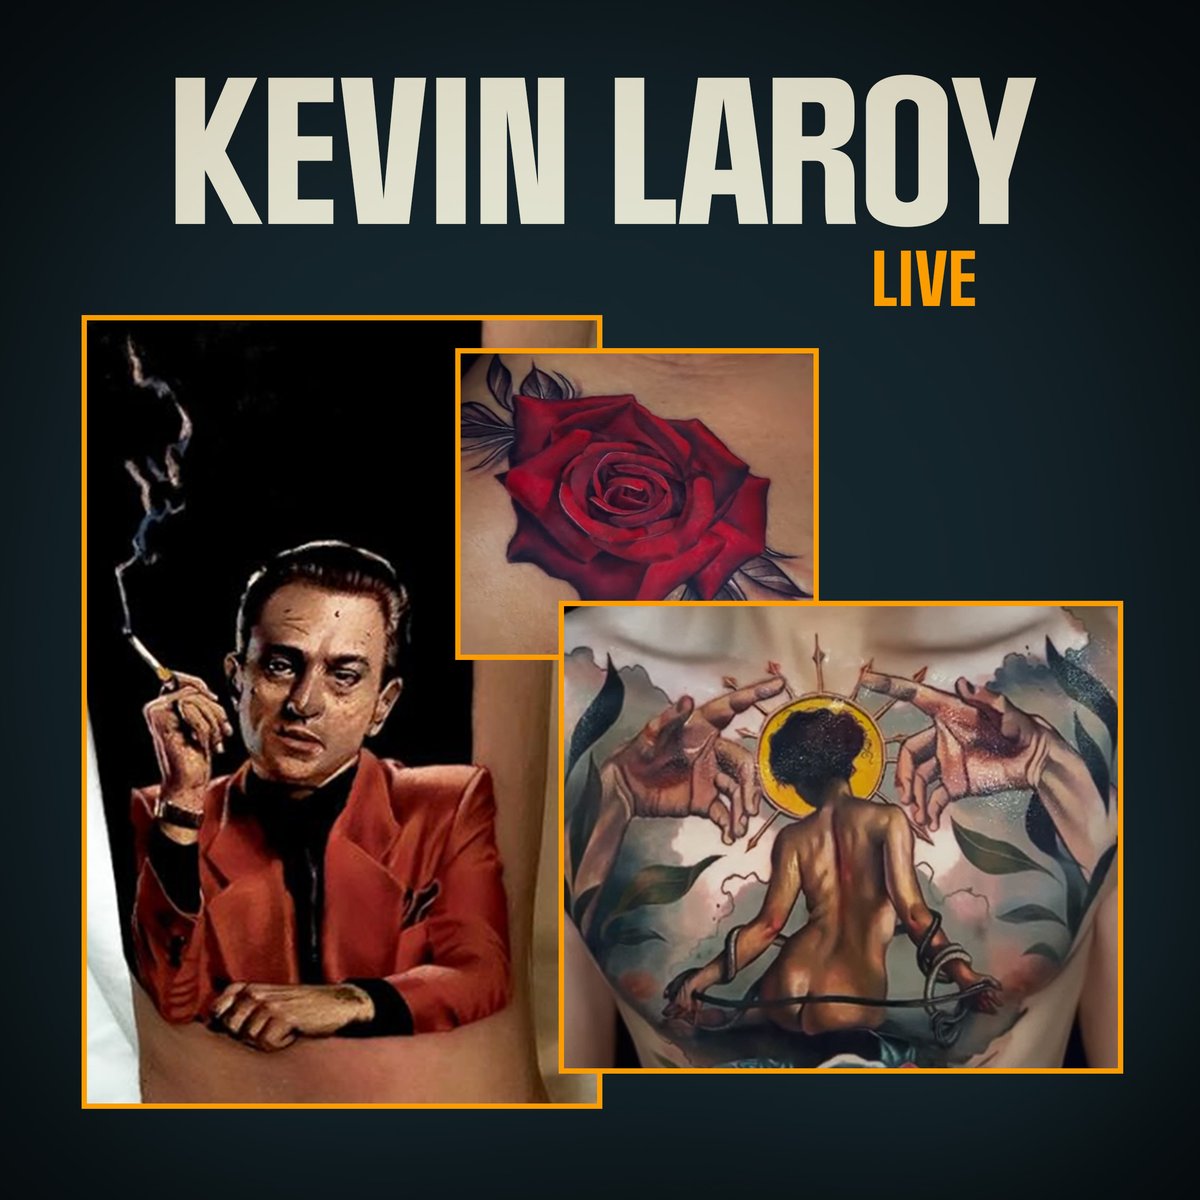 We are stoked to have the incredible @kevinthelaroy on the show! You've seen him on: Ink Master @inkmaster Black Ink Crew @BlackInkCrew How Far is Tattoo Far? @MTV Don't miss it 👇 twitter.com/i/broadcasts/1…